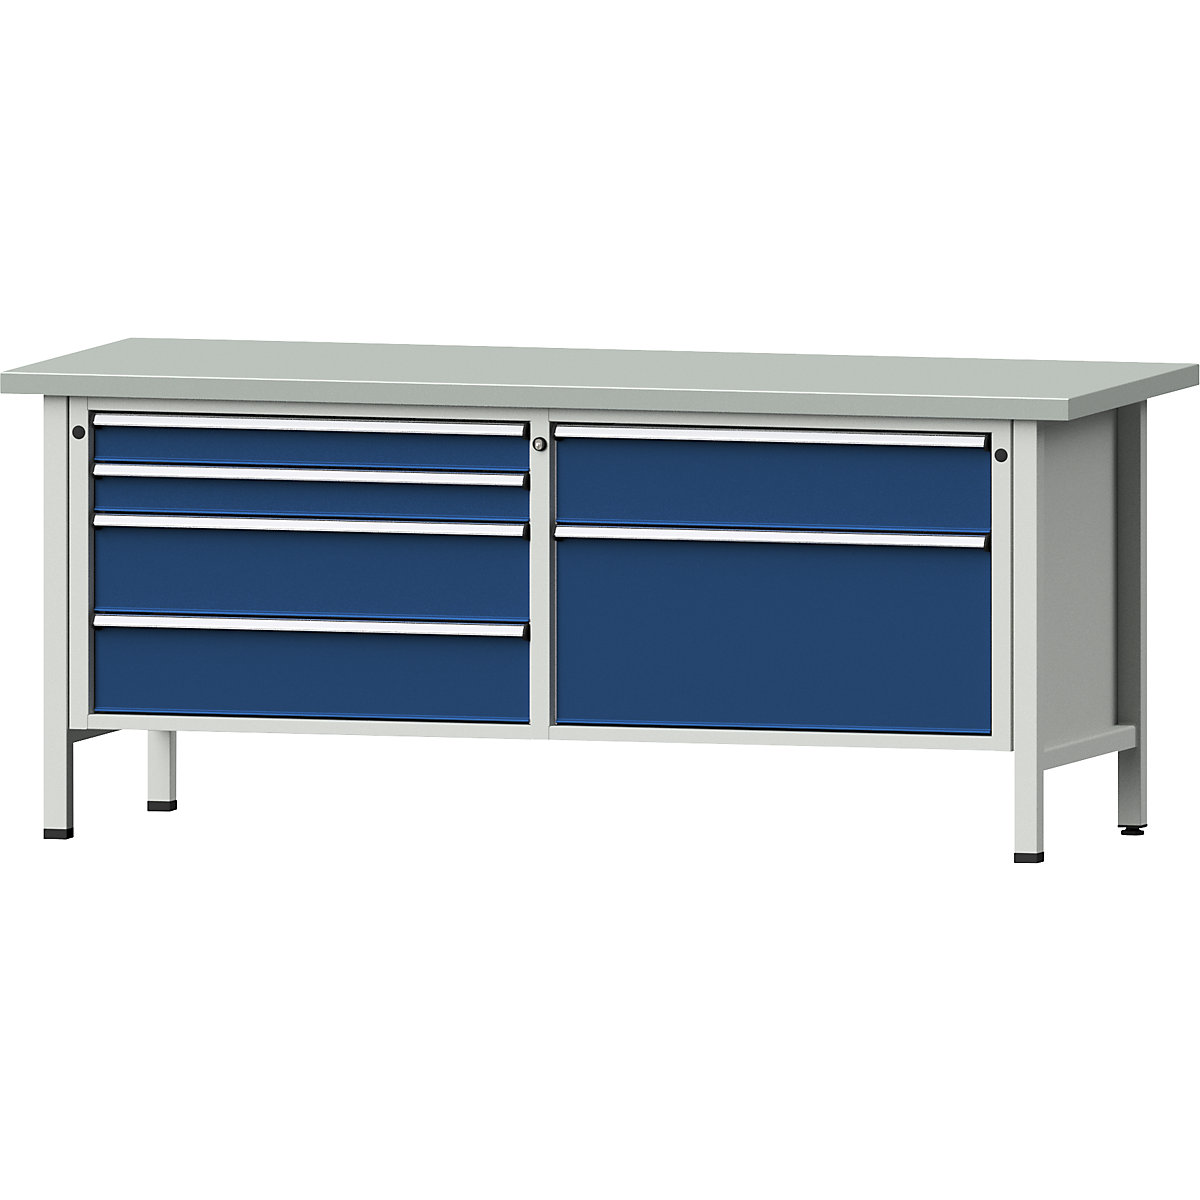 Workbenches 2000 mm wide, frame construction – ANKE, 6 drawers, sheet steel covered worktop, height 840 mm-11